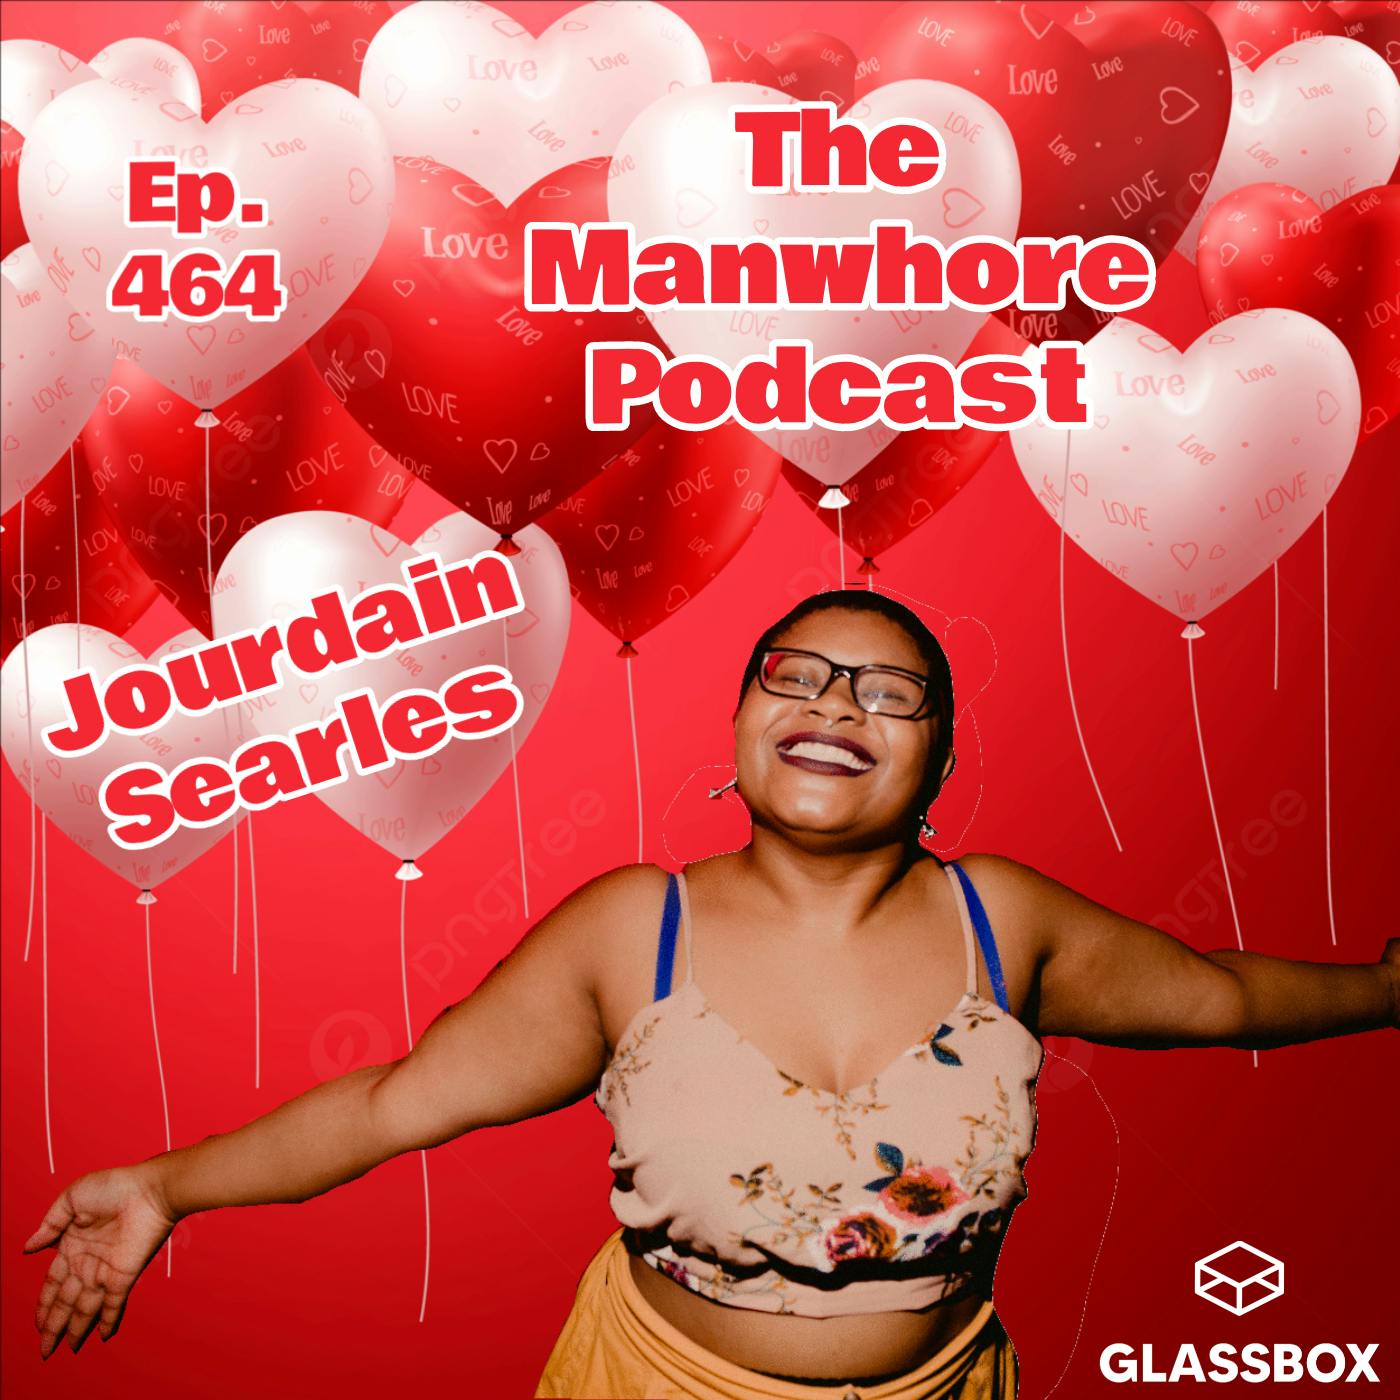 The Manwhore Podcast: A Sex-Positive Quest - Ep. 464: Bad Romance and Bare Minimum Bros with Jourdain Searles